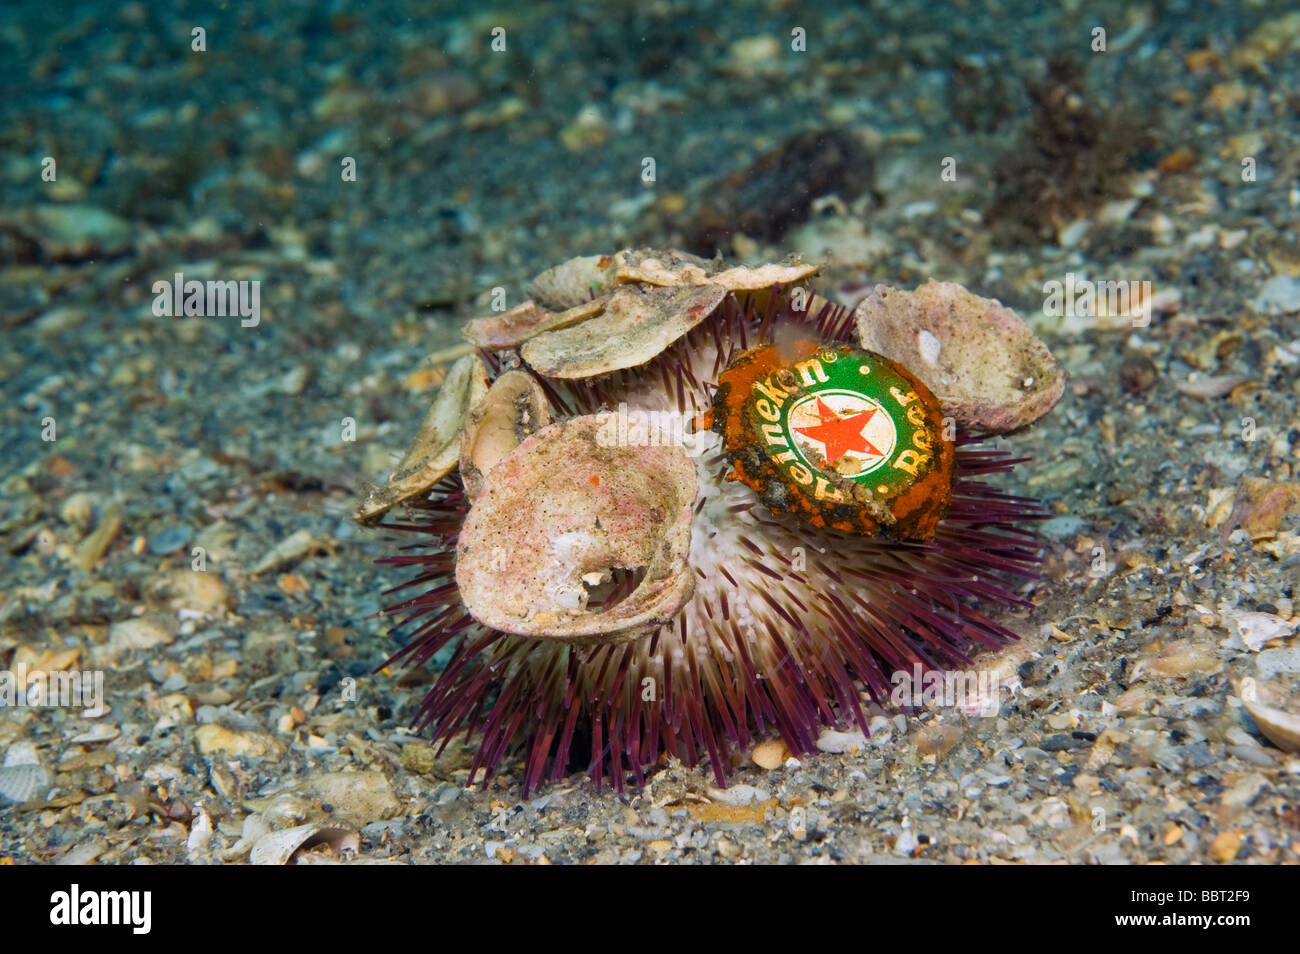 Sea Urchin Lytechinus variegatus with shells and a beer bottle cap or top attached to it Stock Photo